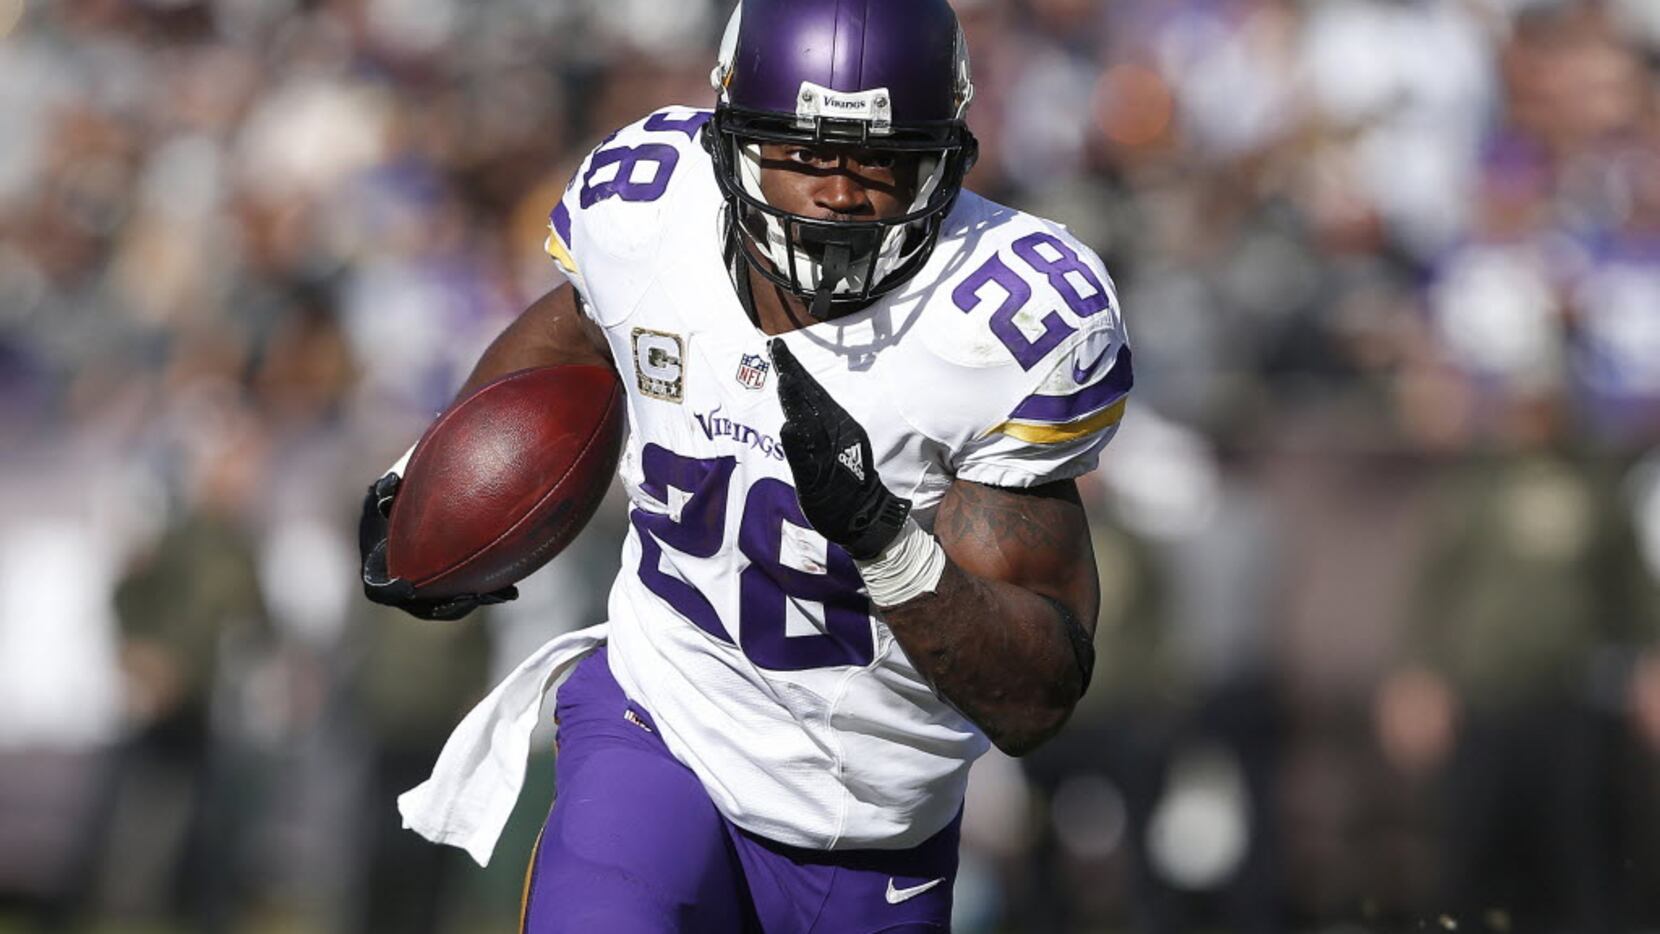 Minnesota Vikings: A Look at RB No. 28 Adrian Peterson